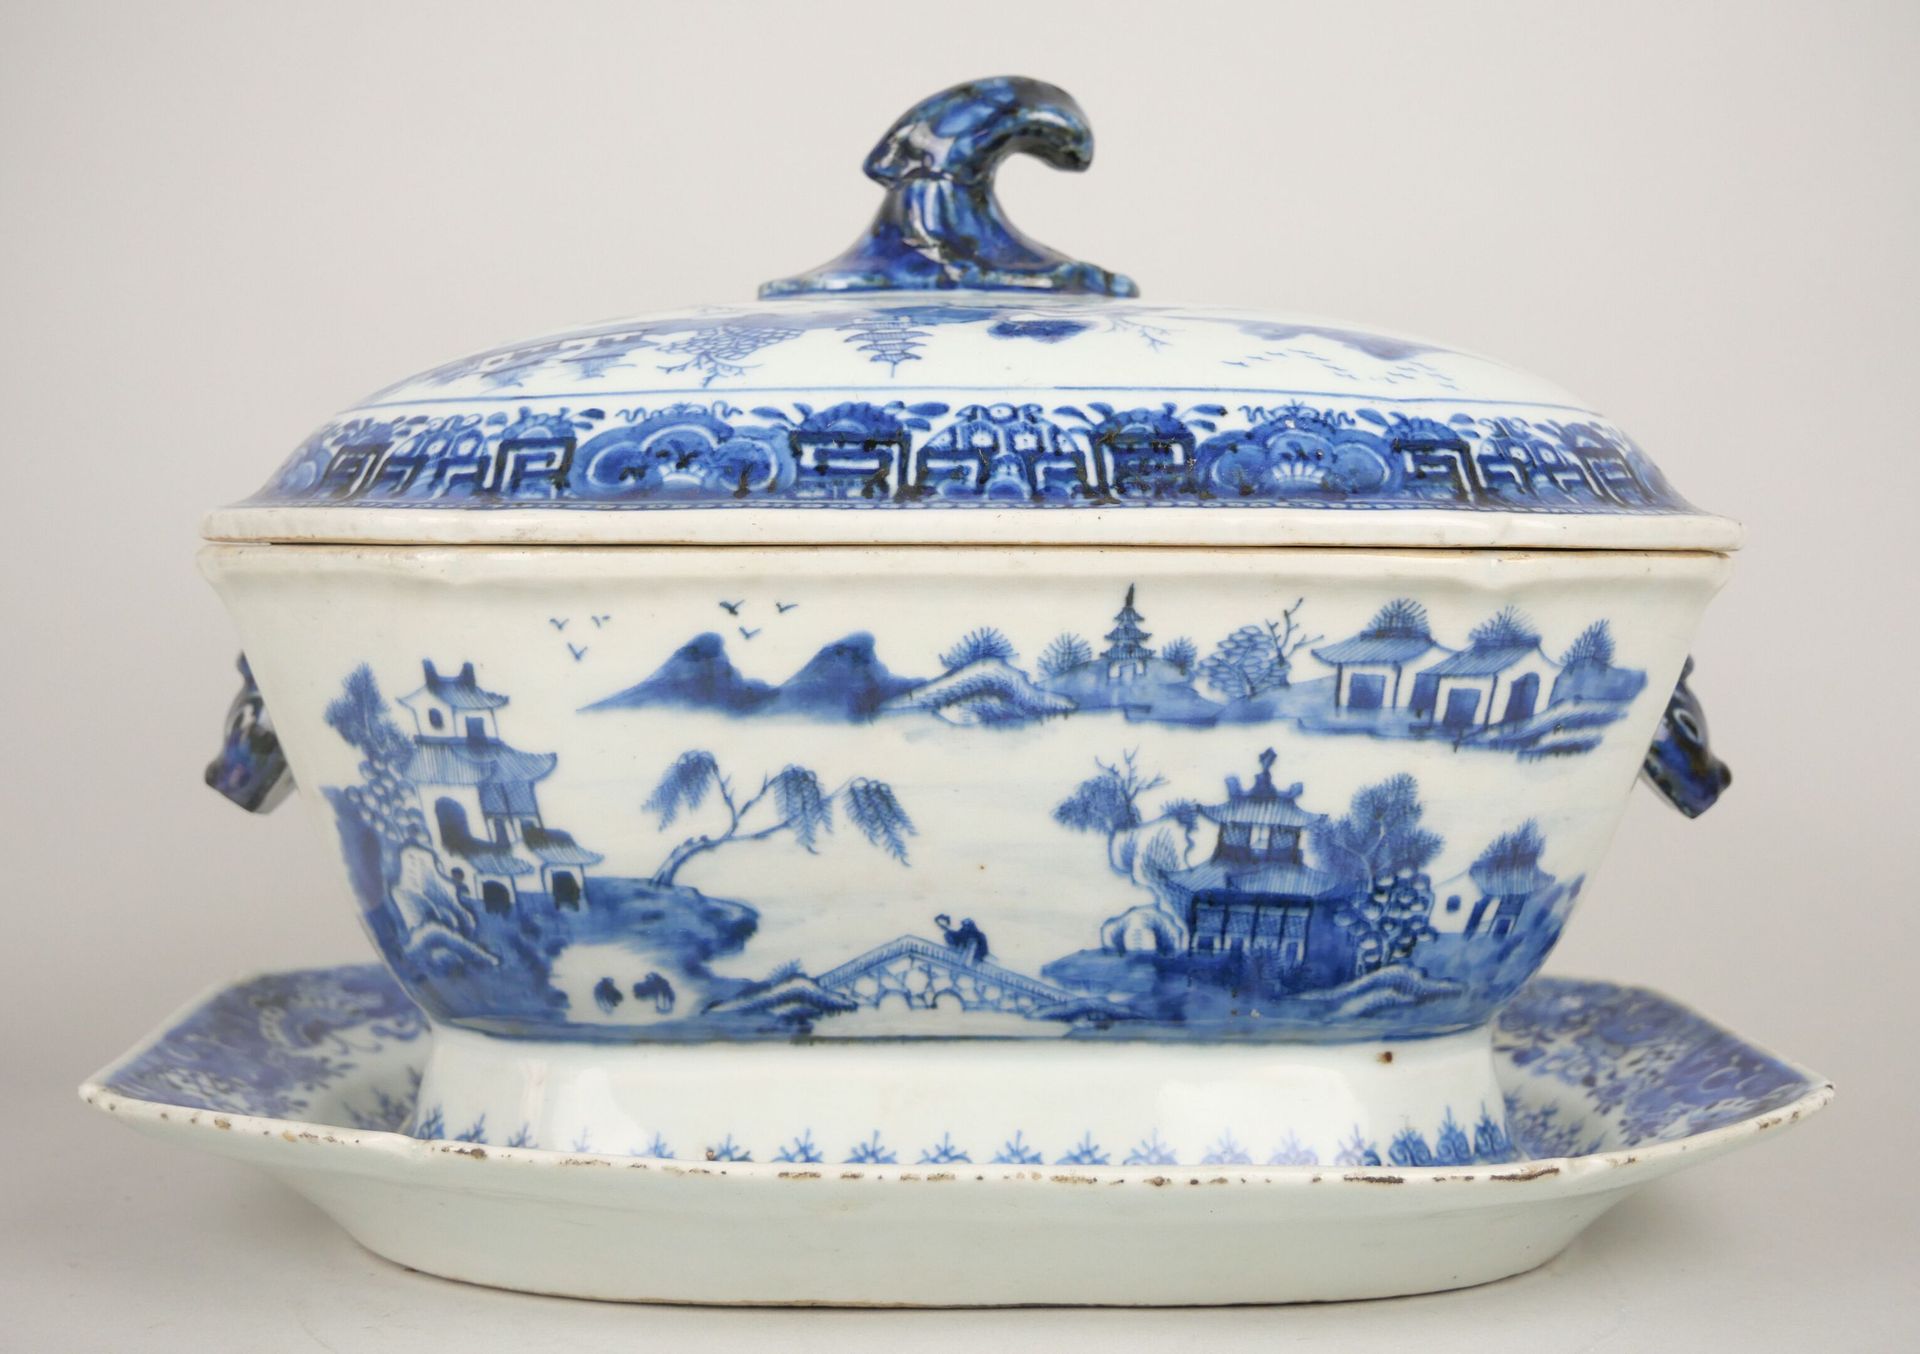 Null CHINA (Compagnie des Indes):

Covered tureen and its display stand in porce&hellip;